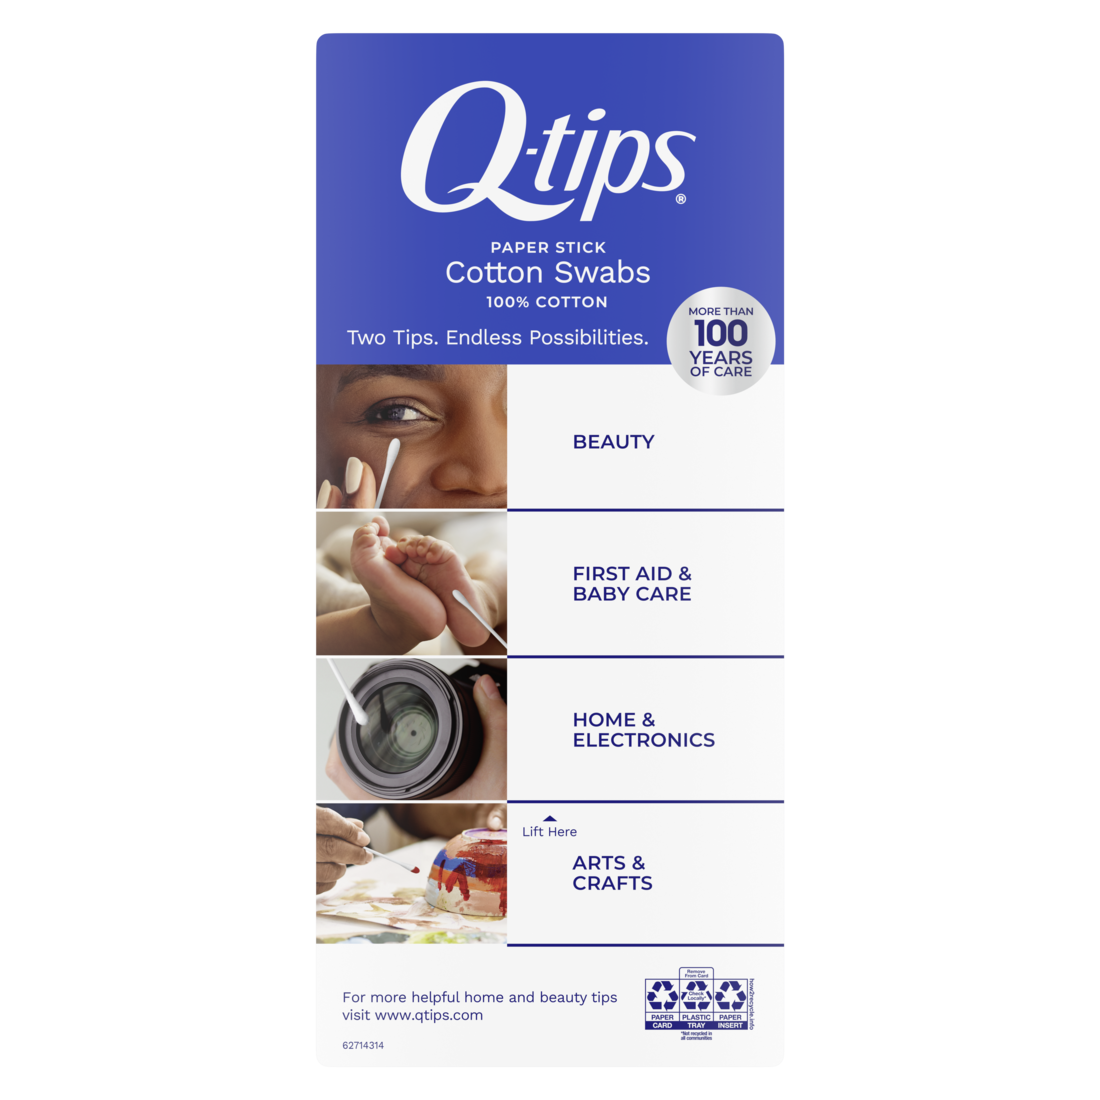 Q-tips Cotton Swabs, Original, For Home, First Aid and Beauty, 100% Cotton, 750 Count - image 2 of 7